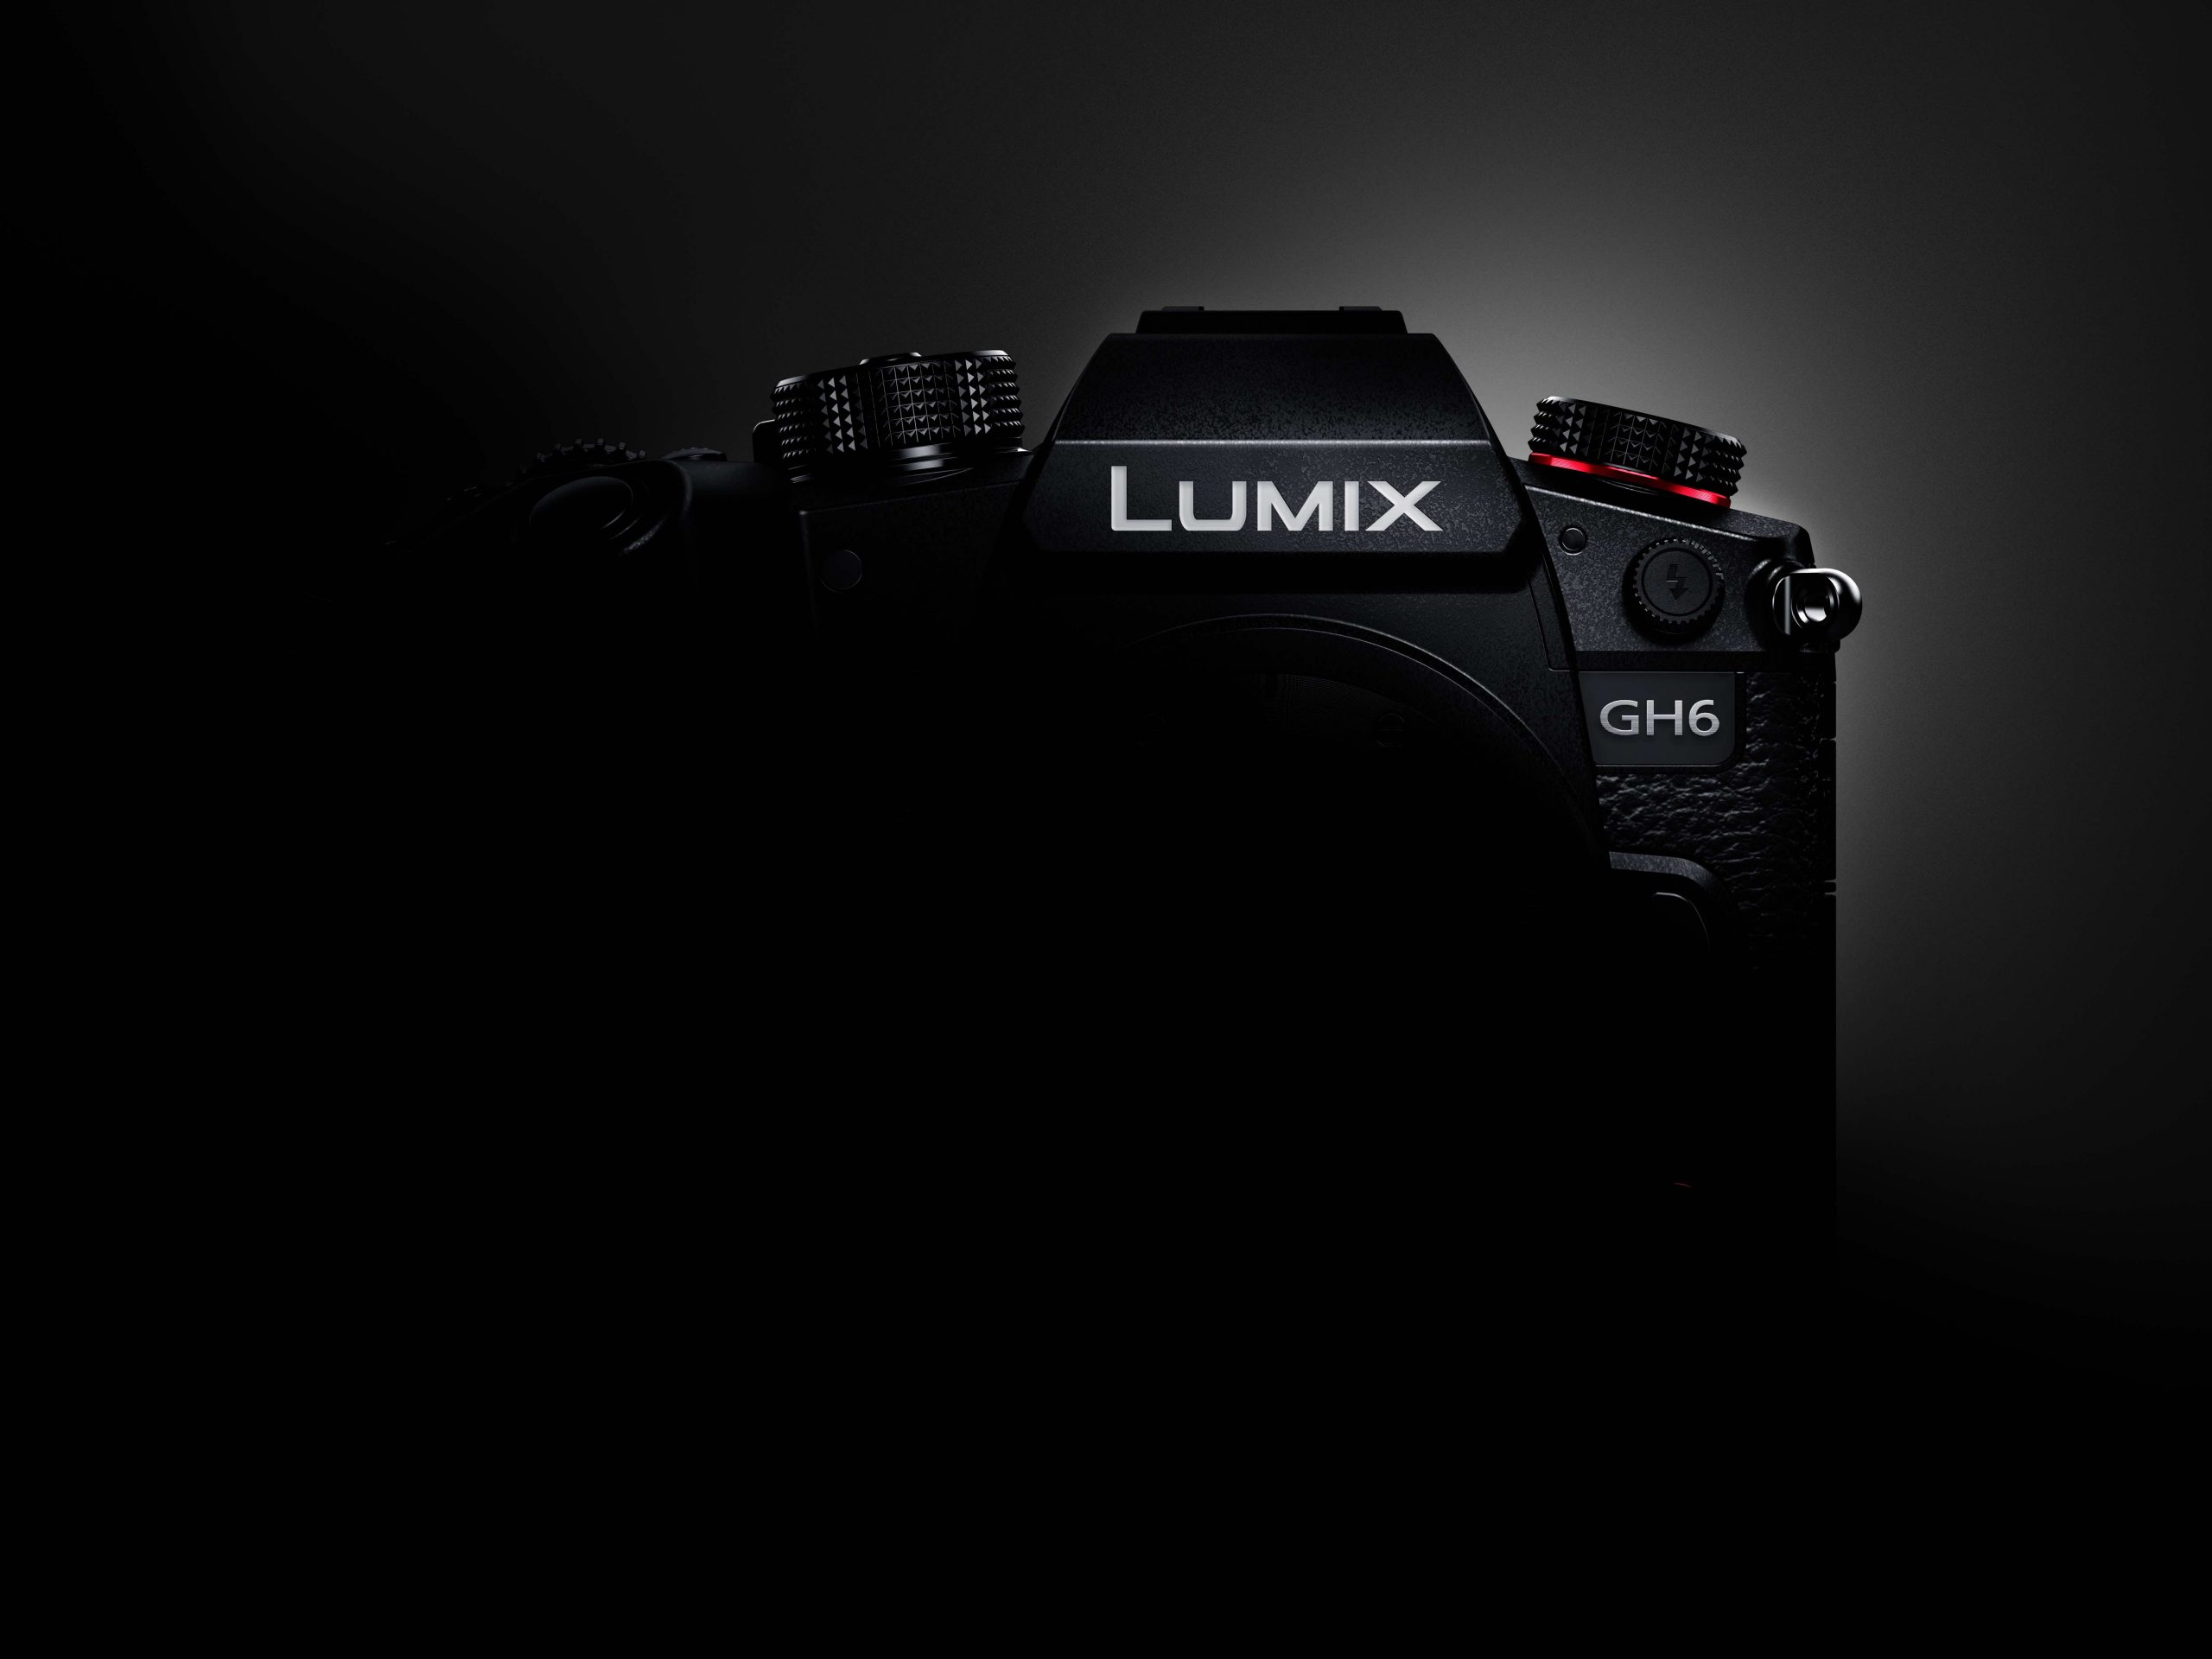 Panasonic GH6 to be announced on February 22nd - Newsshooter